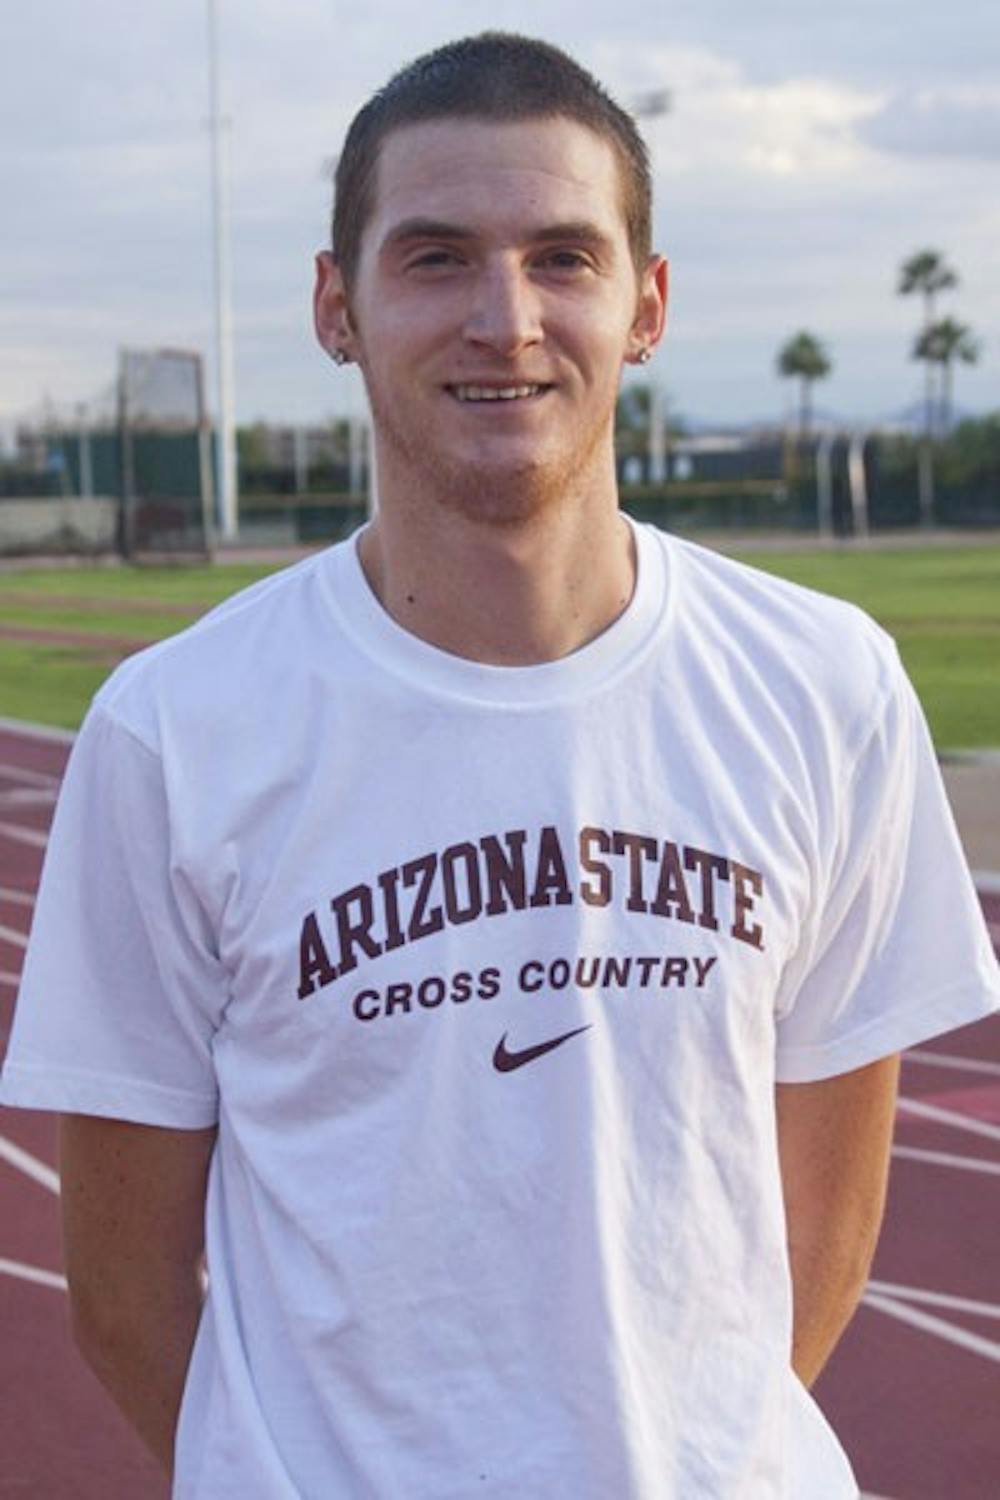 LAUGHING MATTER: Redshirt junior Dylan Hatcher likes to keep things light among the tight-knit ASU cross country team, always helping his teammates have fun and not take things too seriously. (Photo by Annie Wechter)